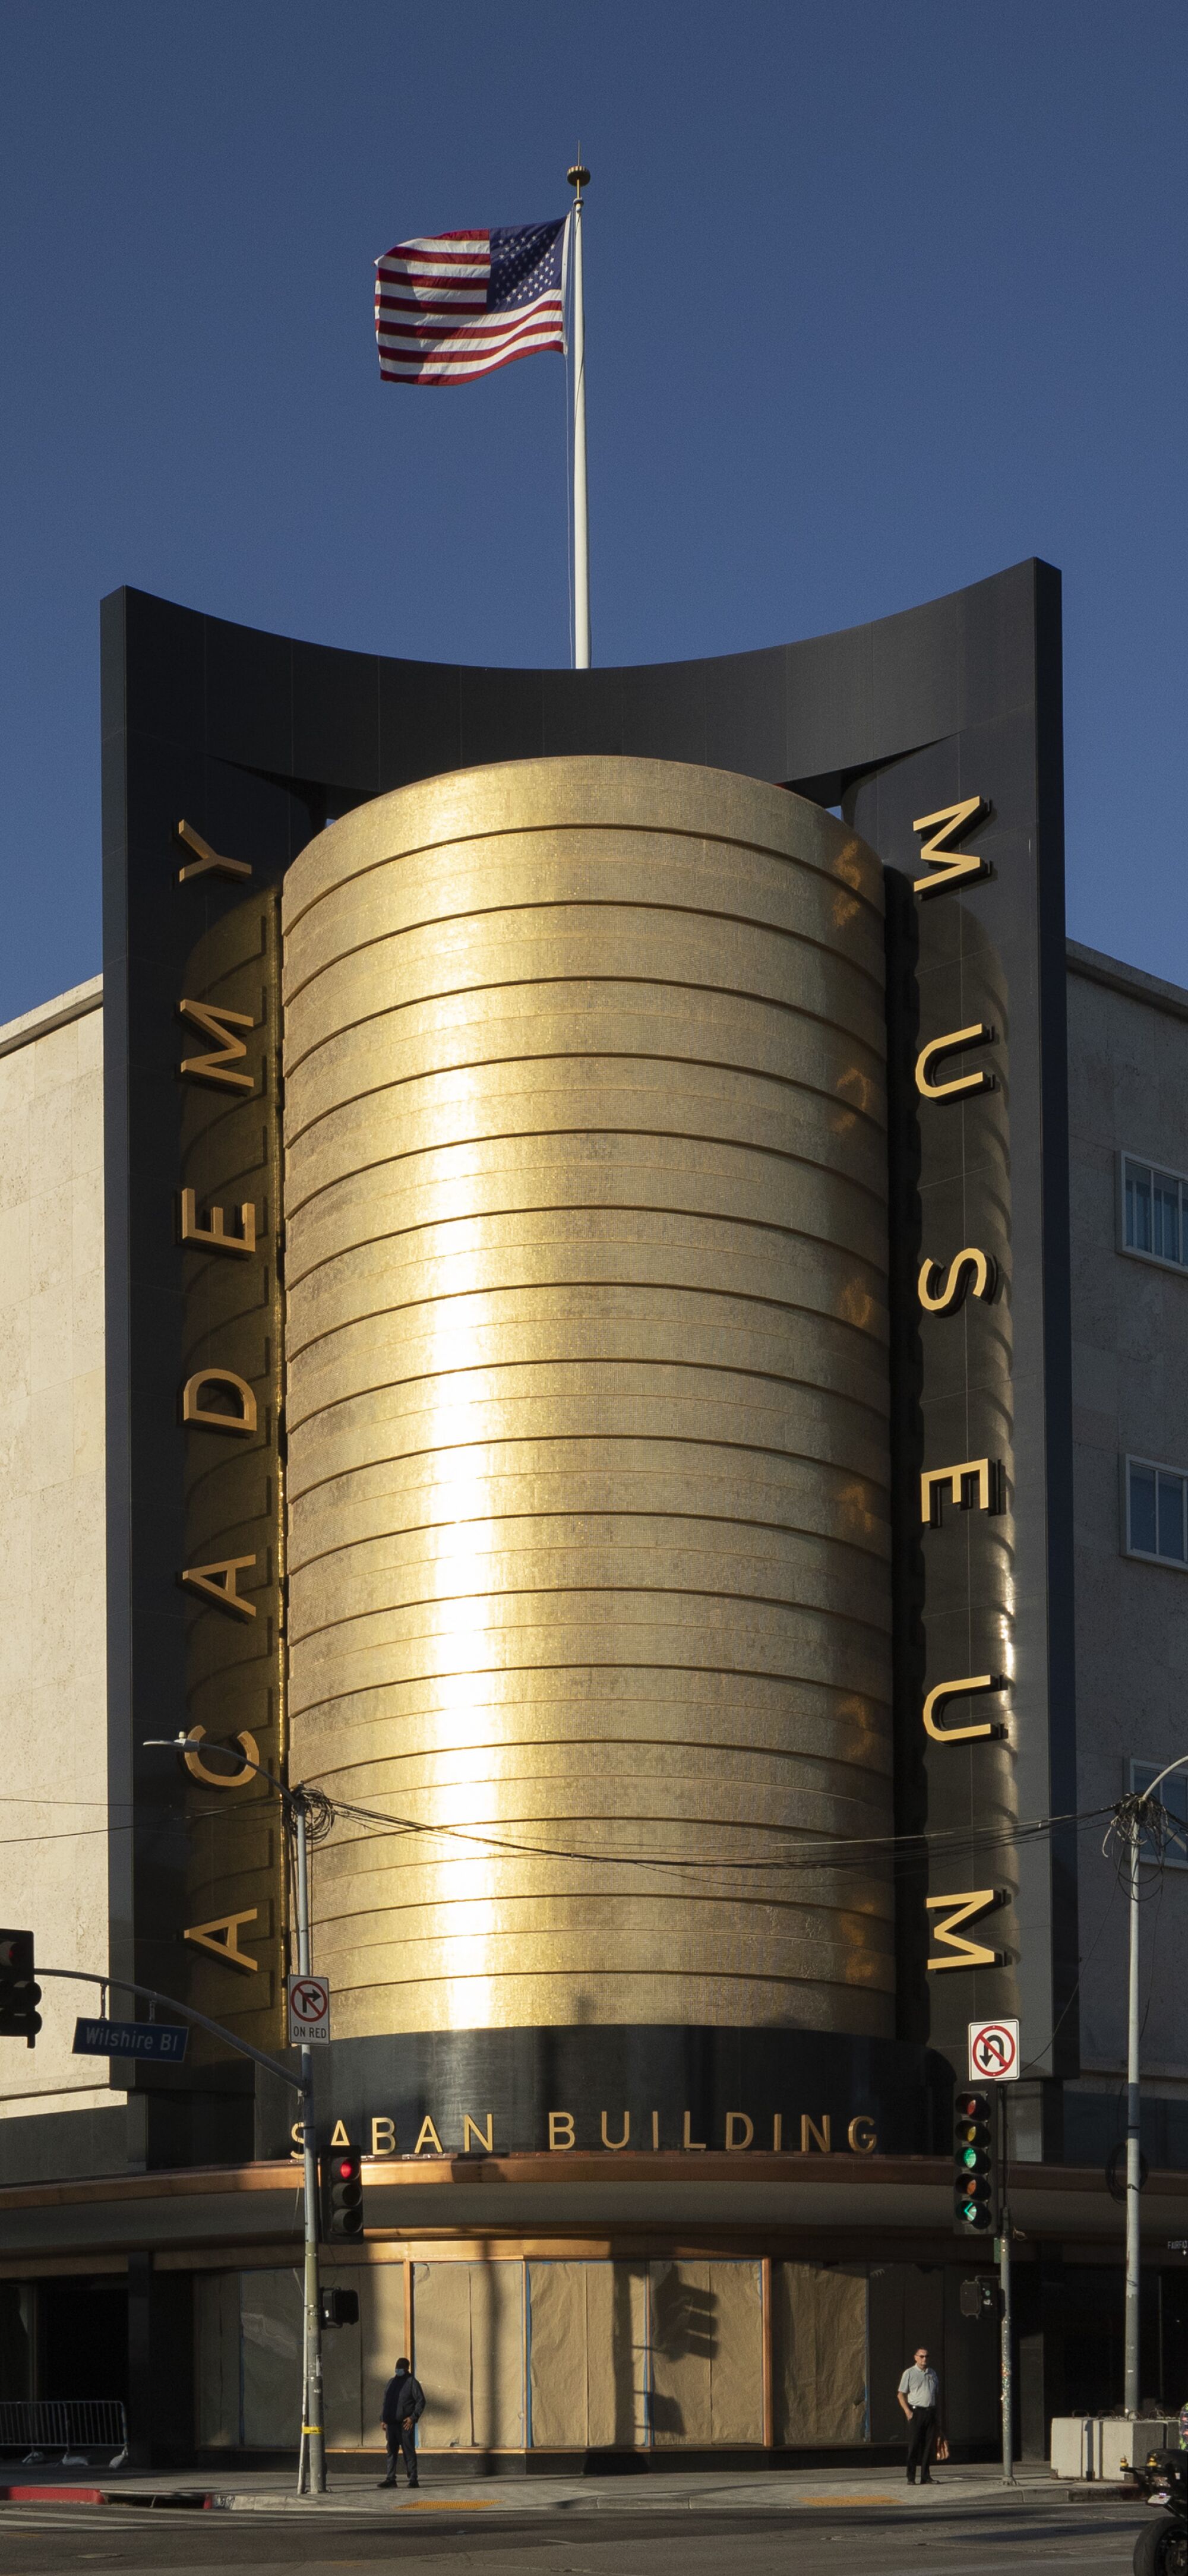 The Art Deco exterior of the Academy Museum of Motion Pictures.